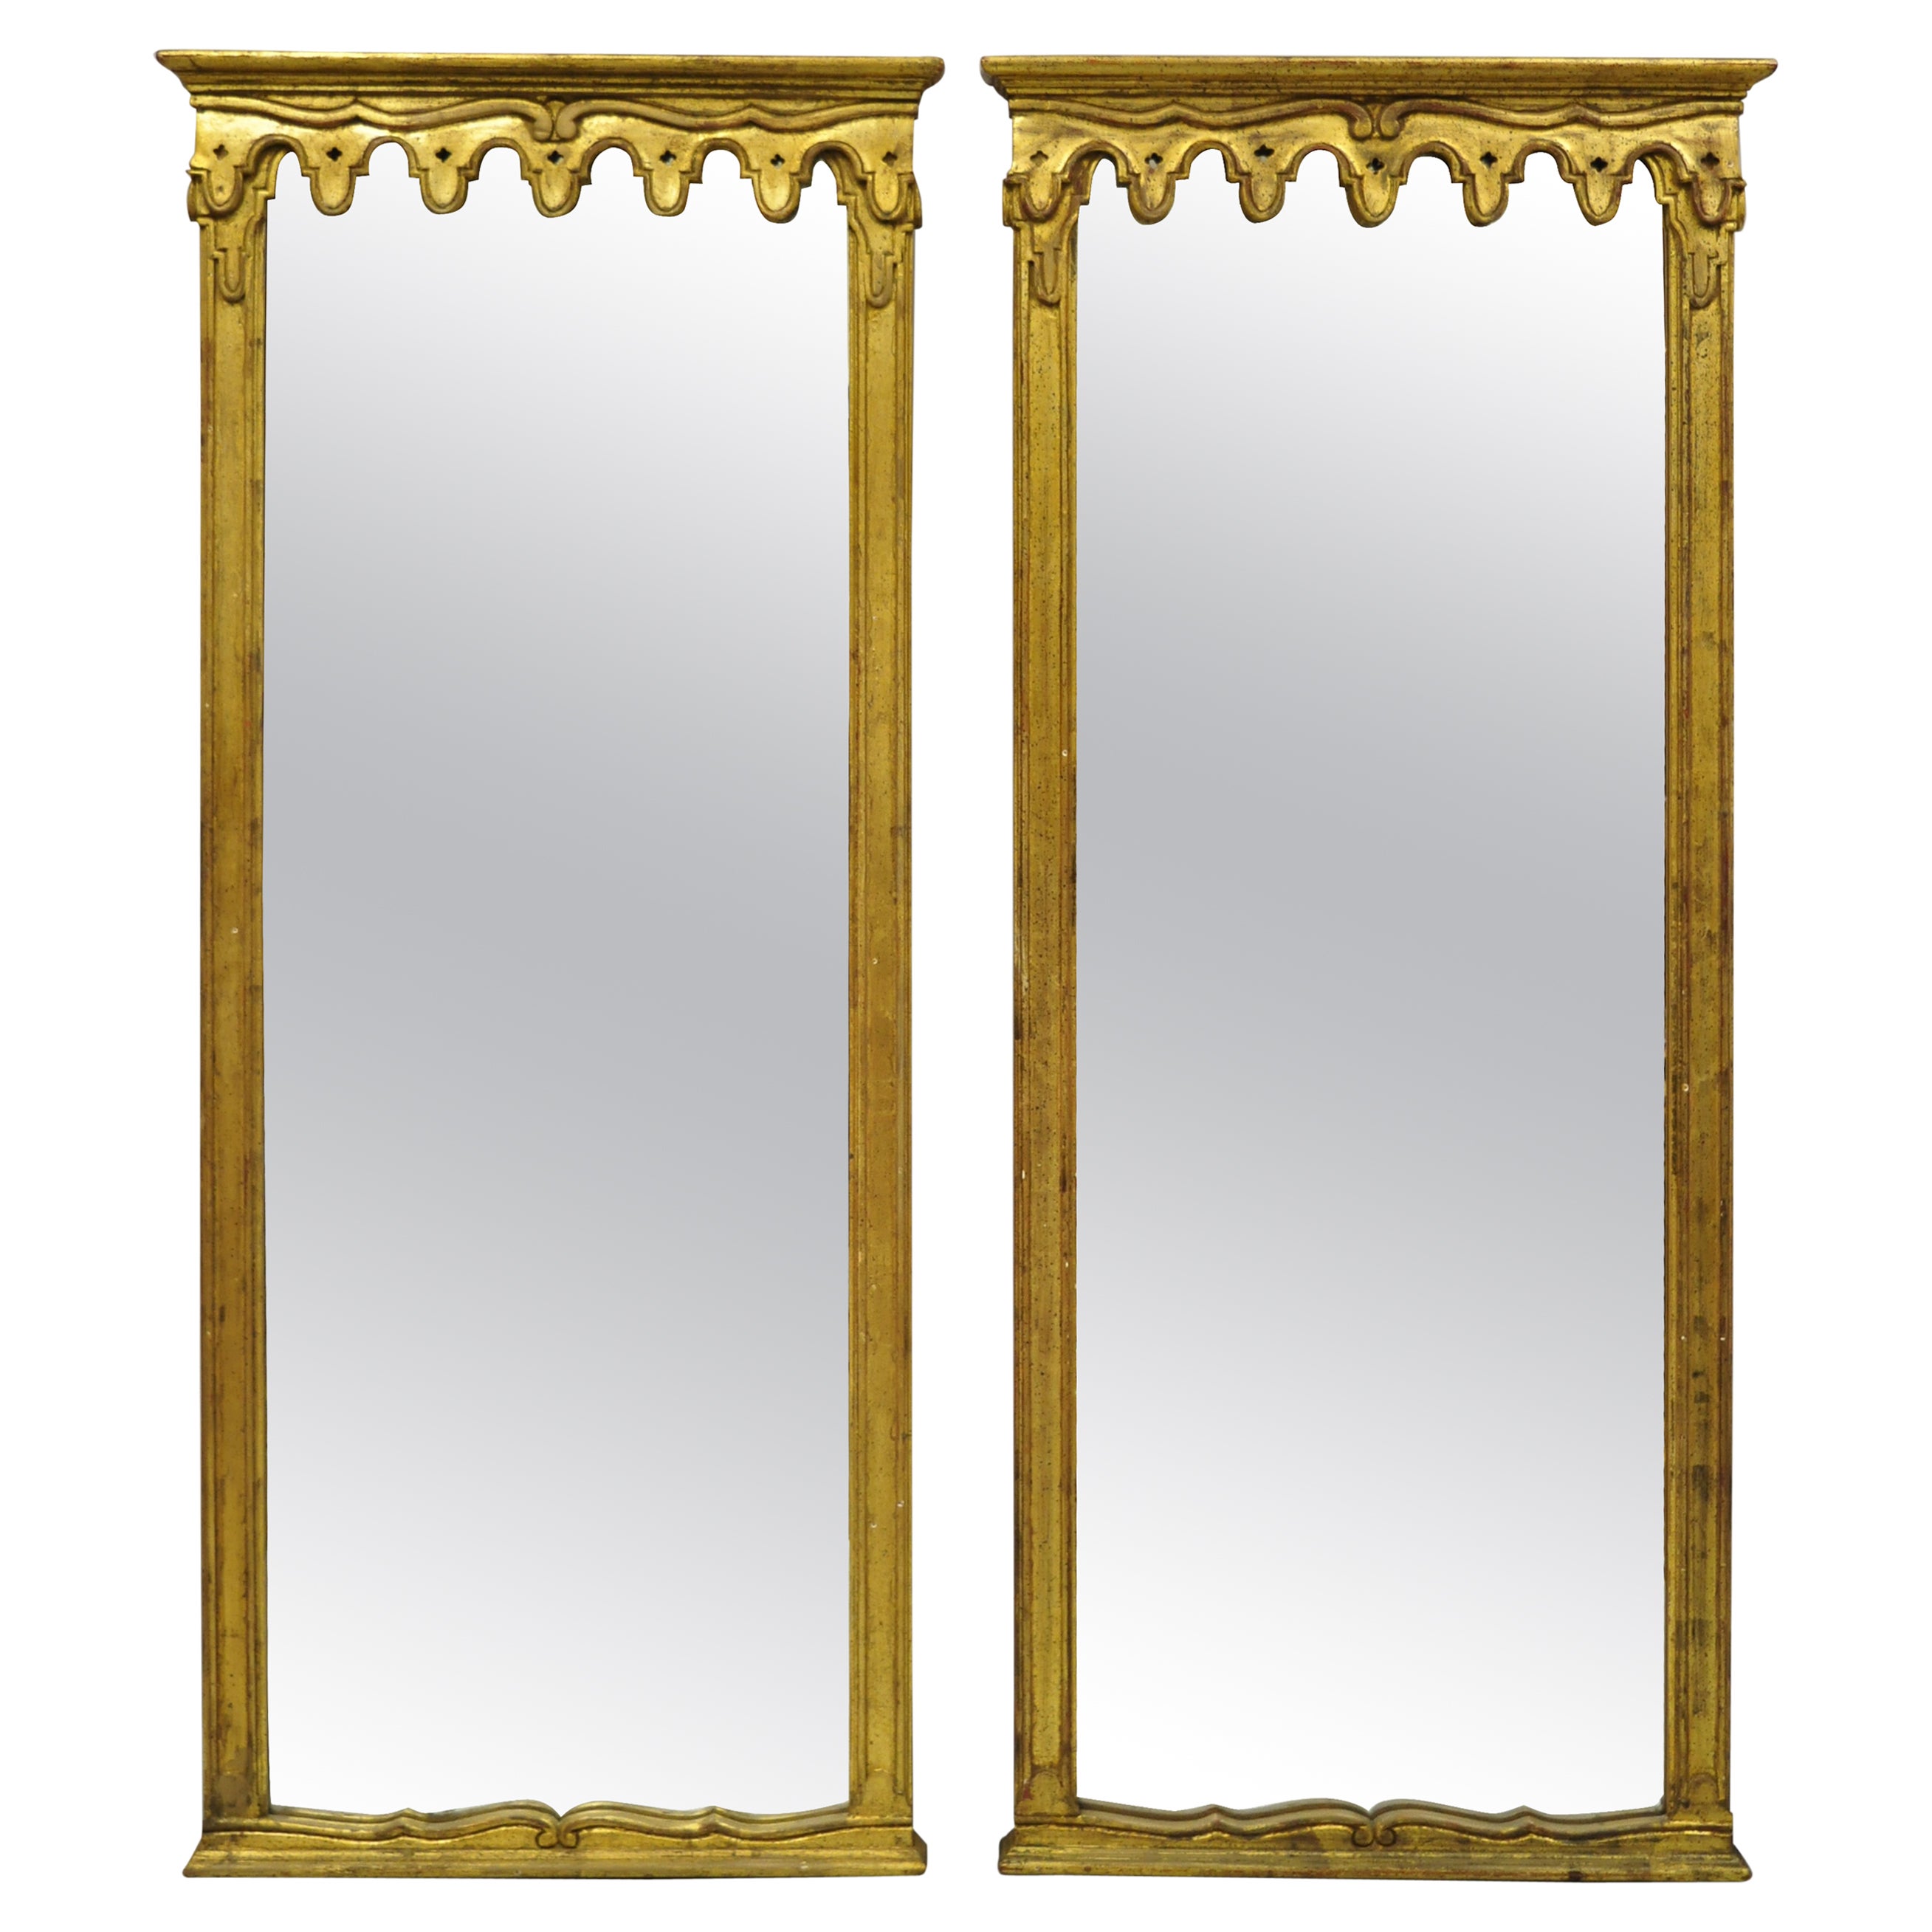 Vintage Italian Hollywood Regency Gold Giltwood Trumeau Wall Mirrors, a Pair For Sale